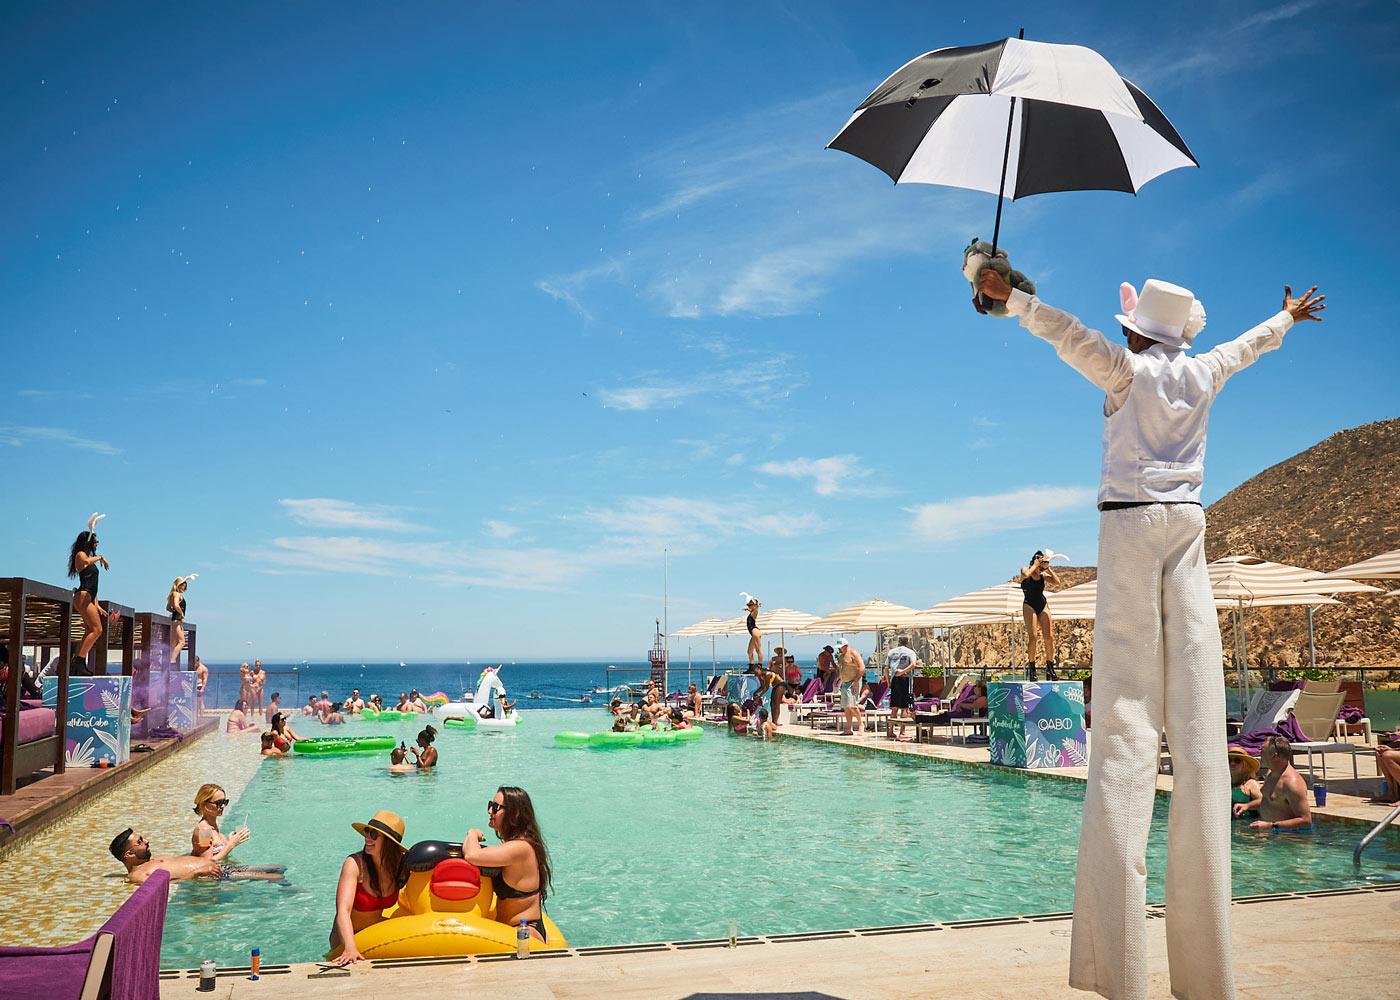 A fun pool party at Breathless, one of the best all-inclusive resorts in Cabo